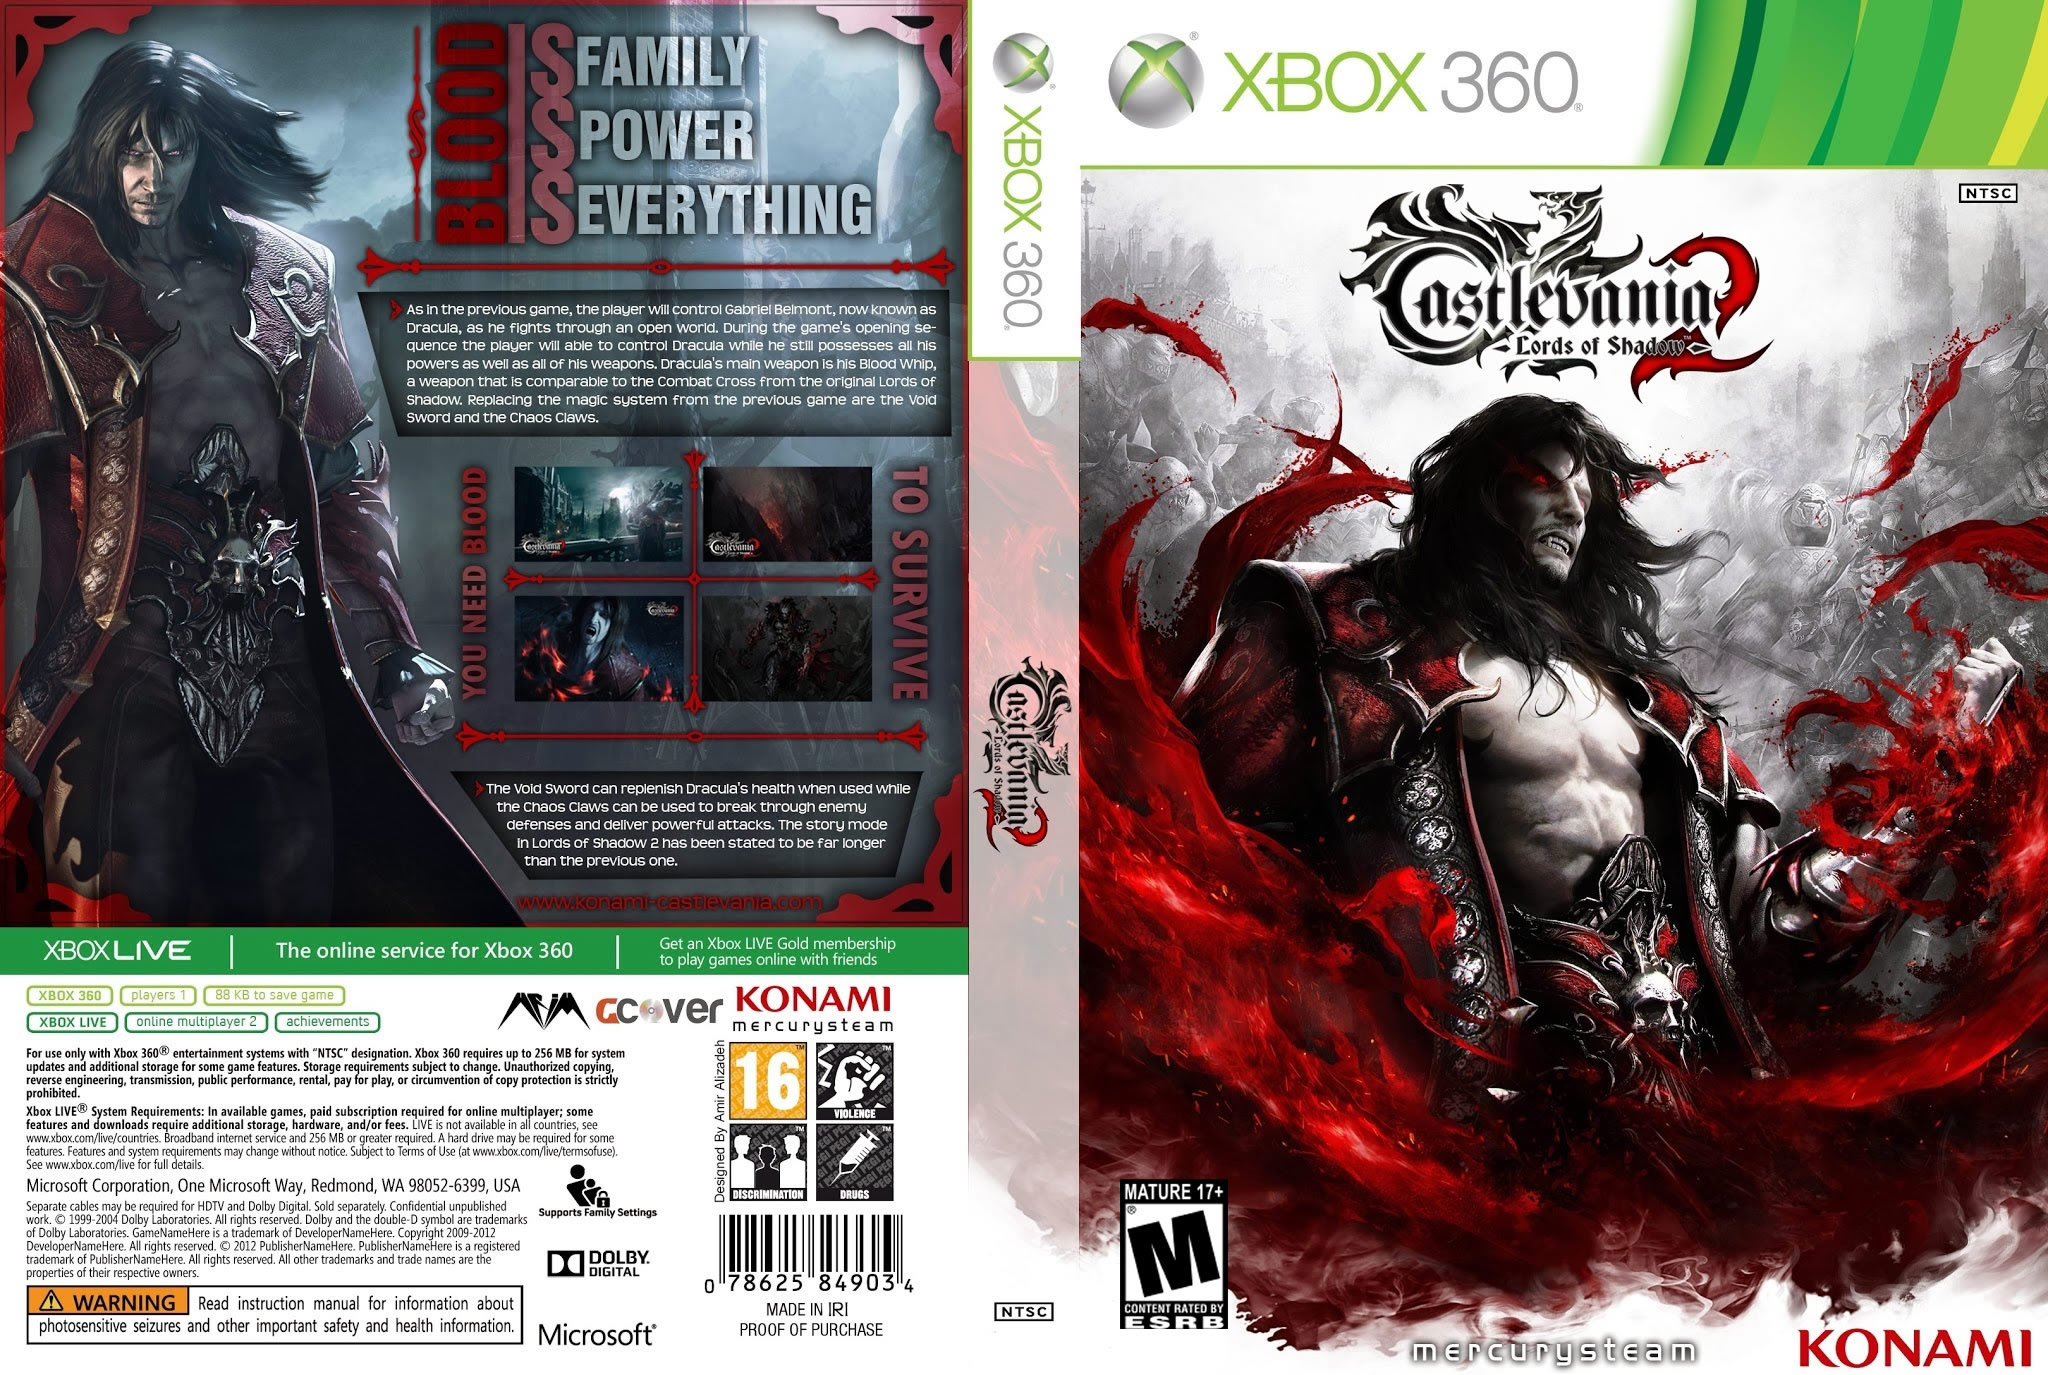 XBOX360 Castlevania: Lords of Shadow 2